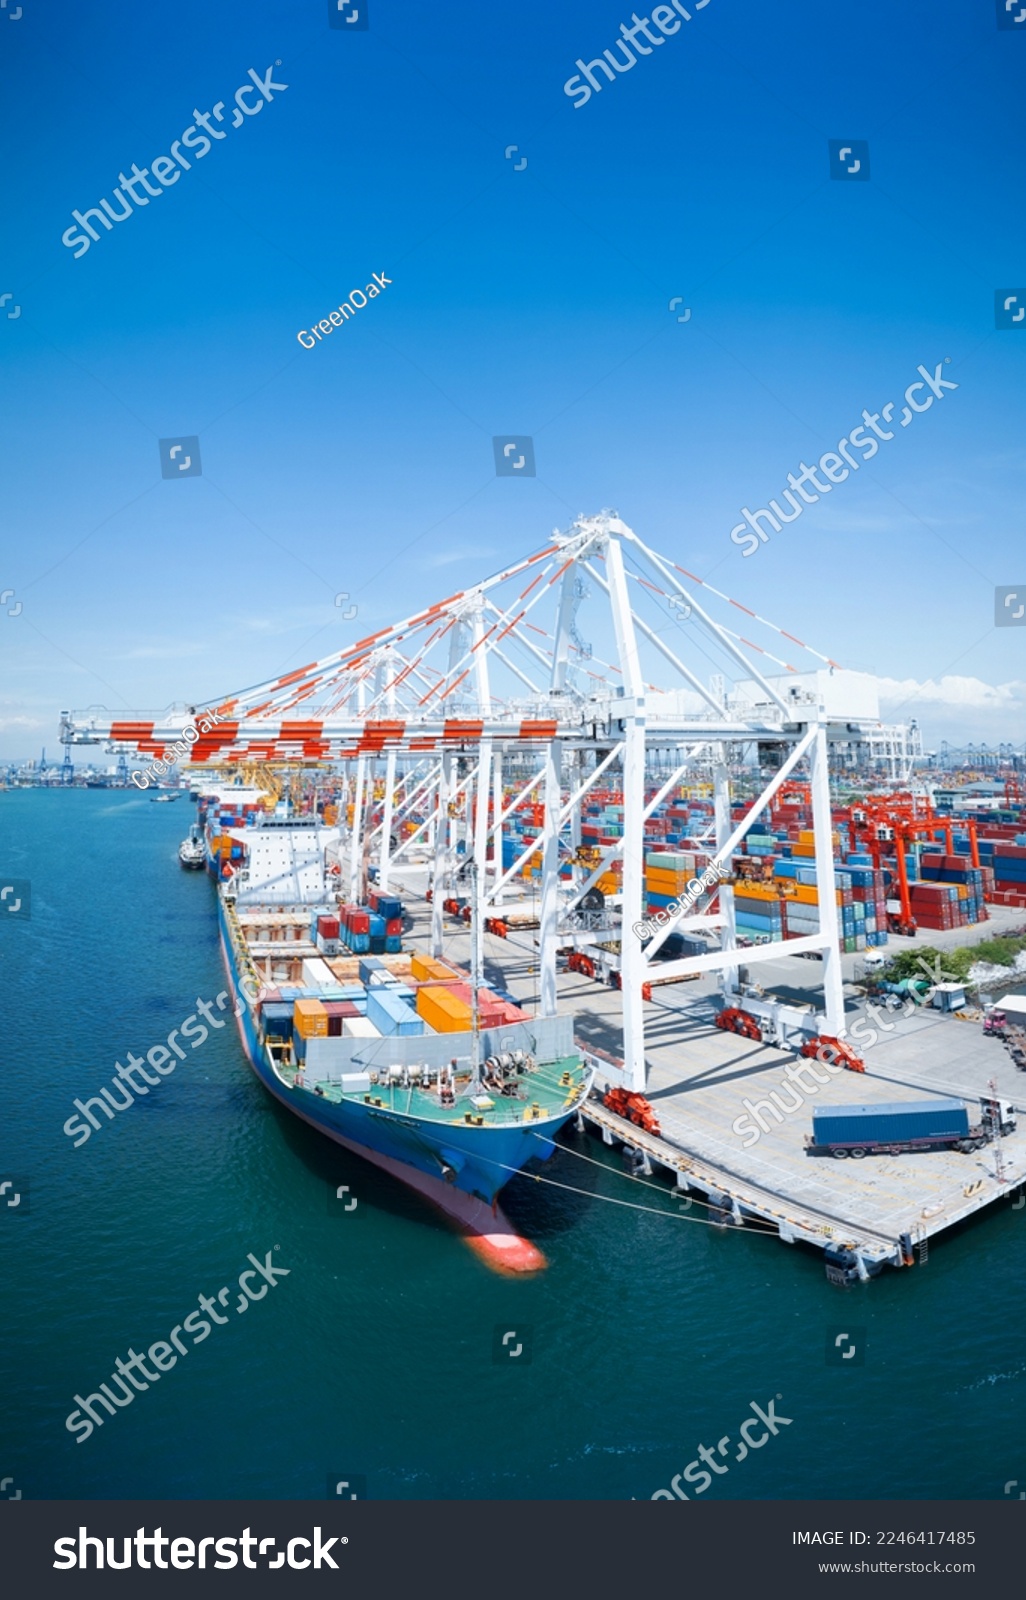 Crane loading cargo box to Large container Ship at Cargo Sea Port. Freight shipping container box transportation and logistics to Customs sea port. #2246417485